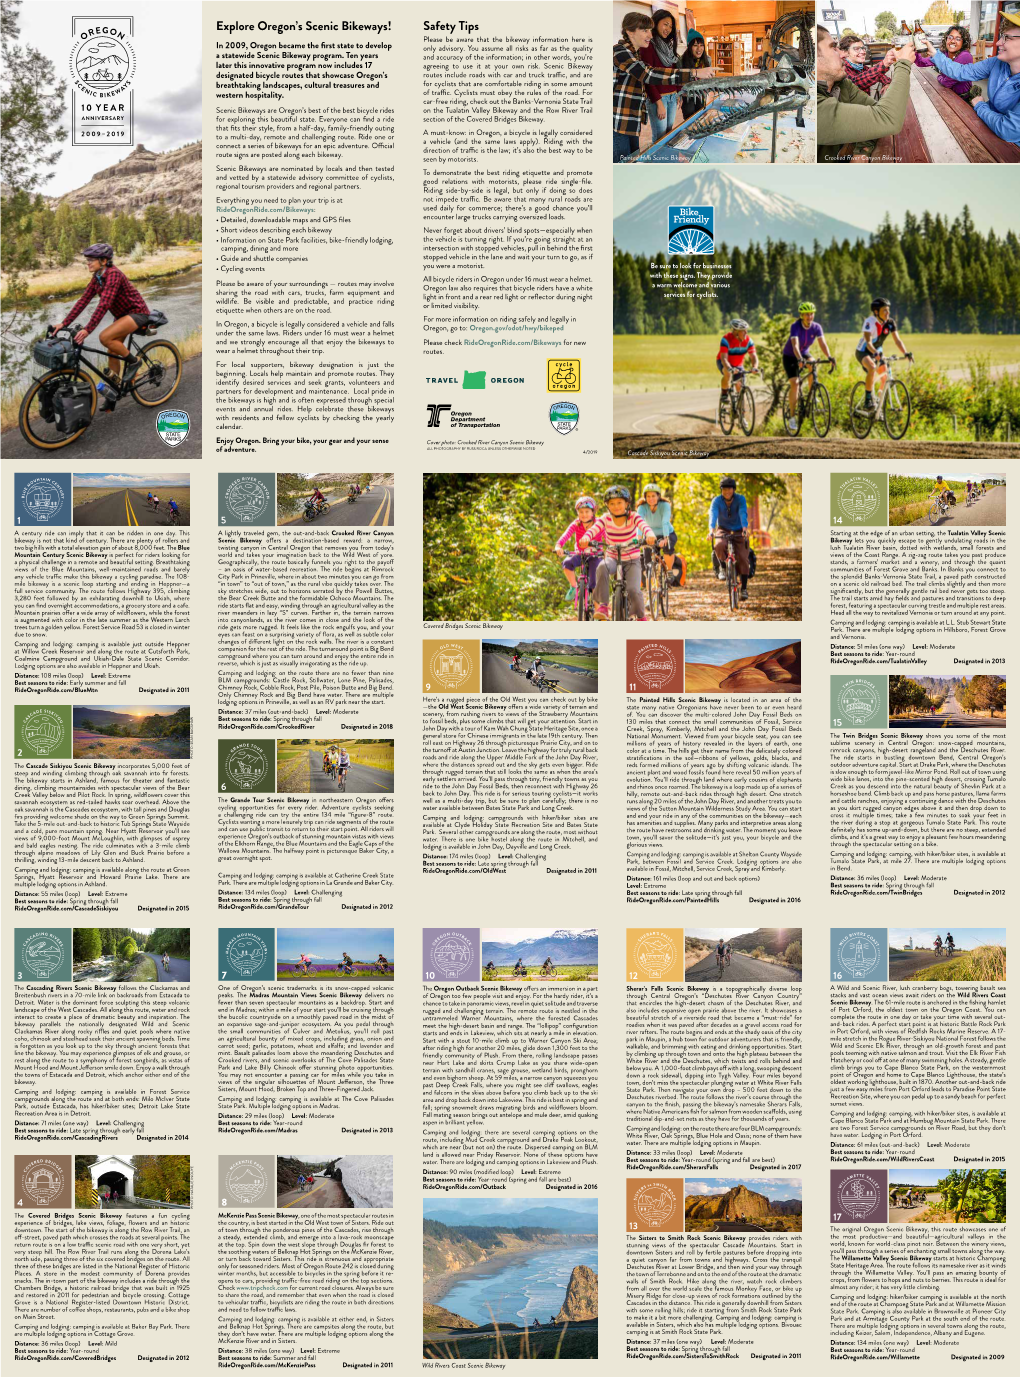 Scenic Bikeways! Safety Tips Please Be Aware That the Bikeway Information Here Is in 2009, Oregon Became the First State to Develop Only Advisory